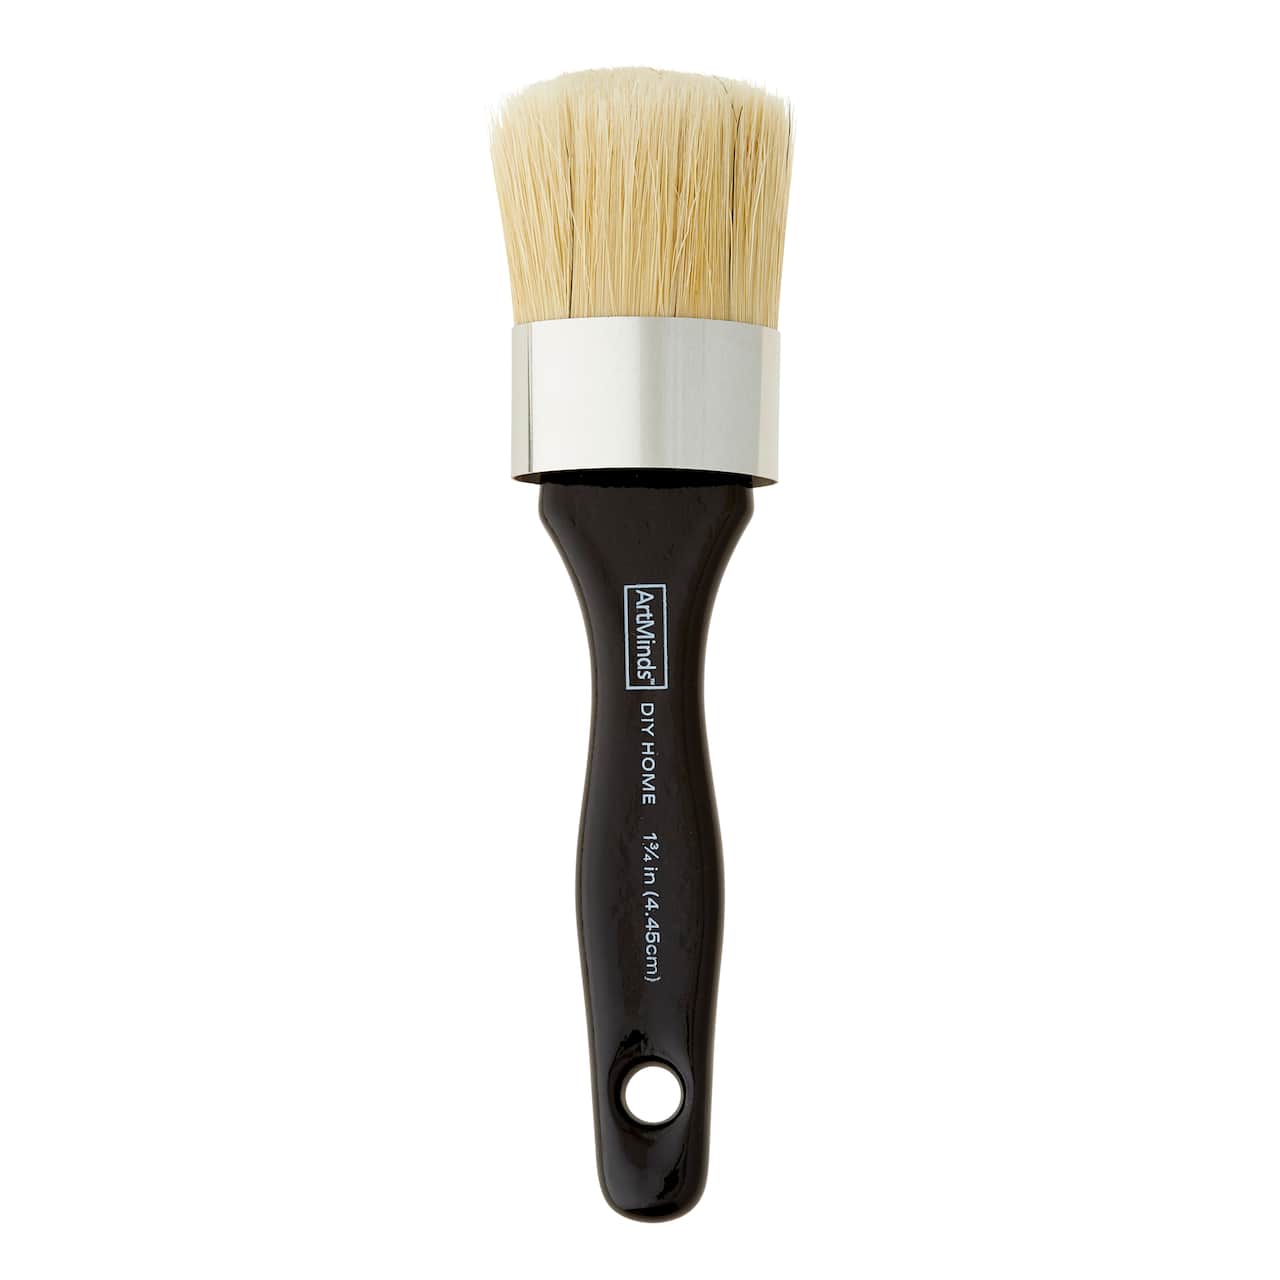 DIY Home Large Wax & Stencil Brush by ArtMinds, Size: 2, Black